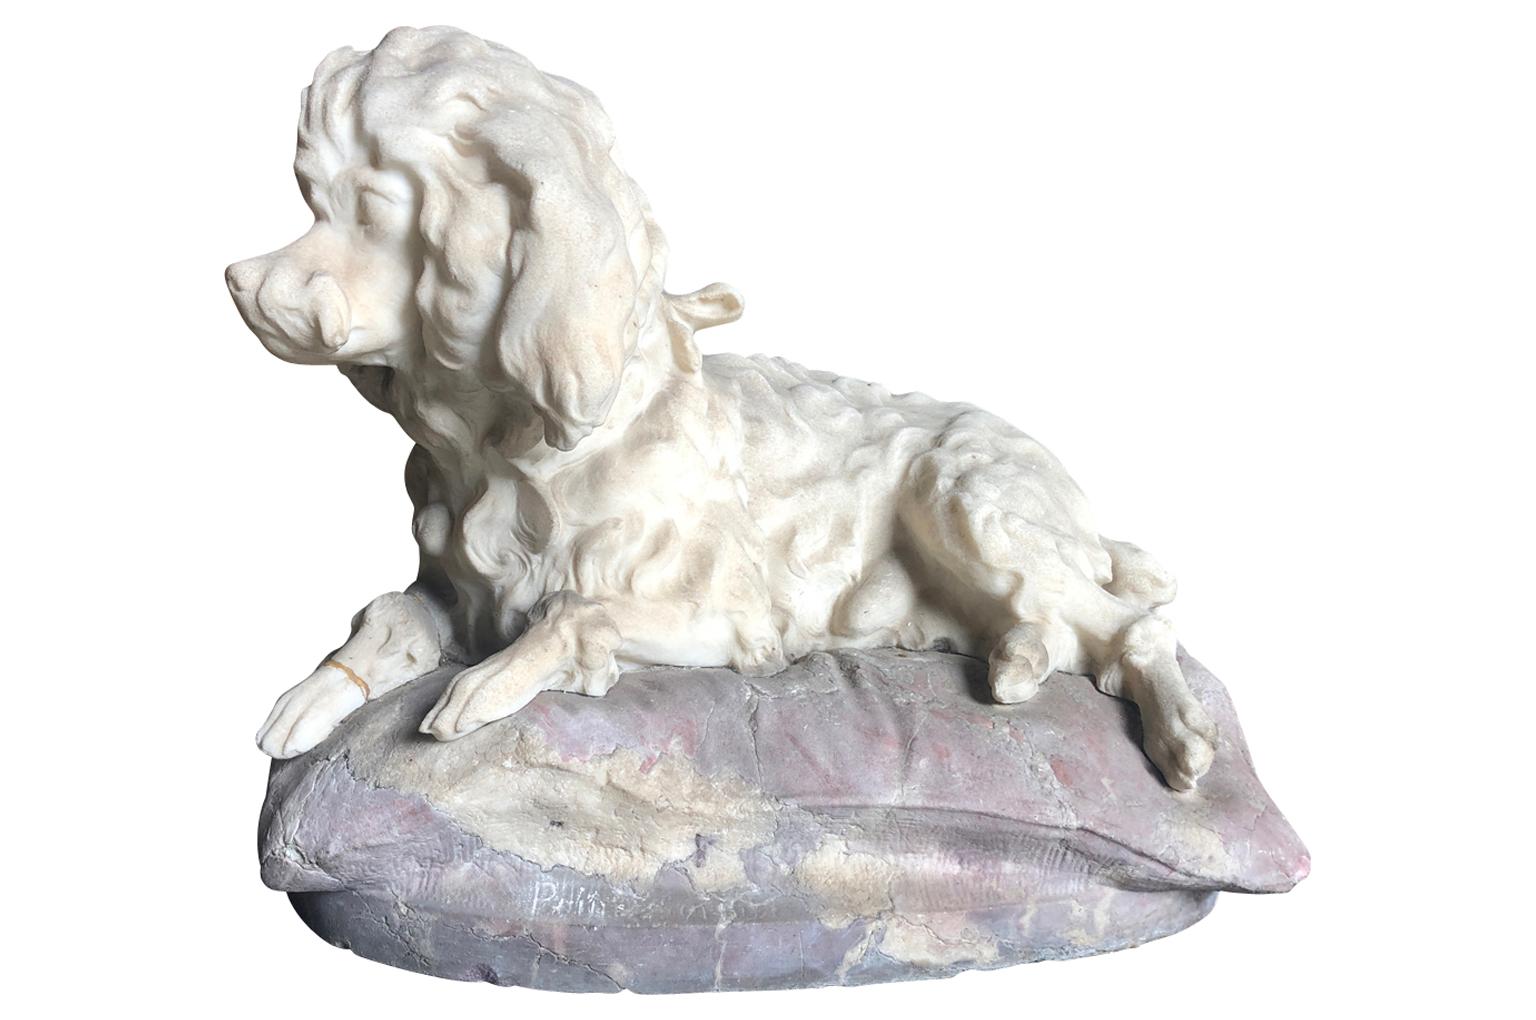 A very endearing 19th century statue of a precious dog resting on its pillow from the Veneto region of Italy. Magnificently carved from Cararra marble. A wonderful accent piece.